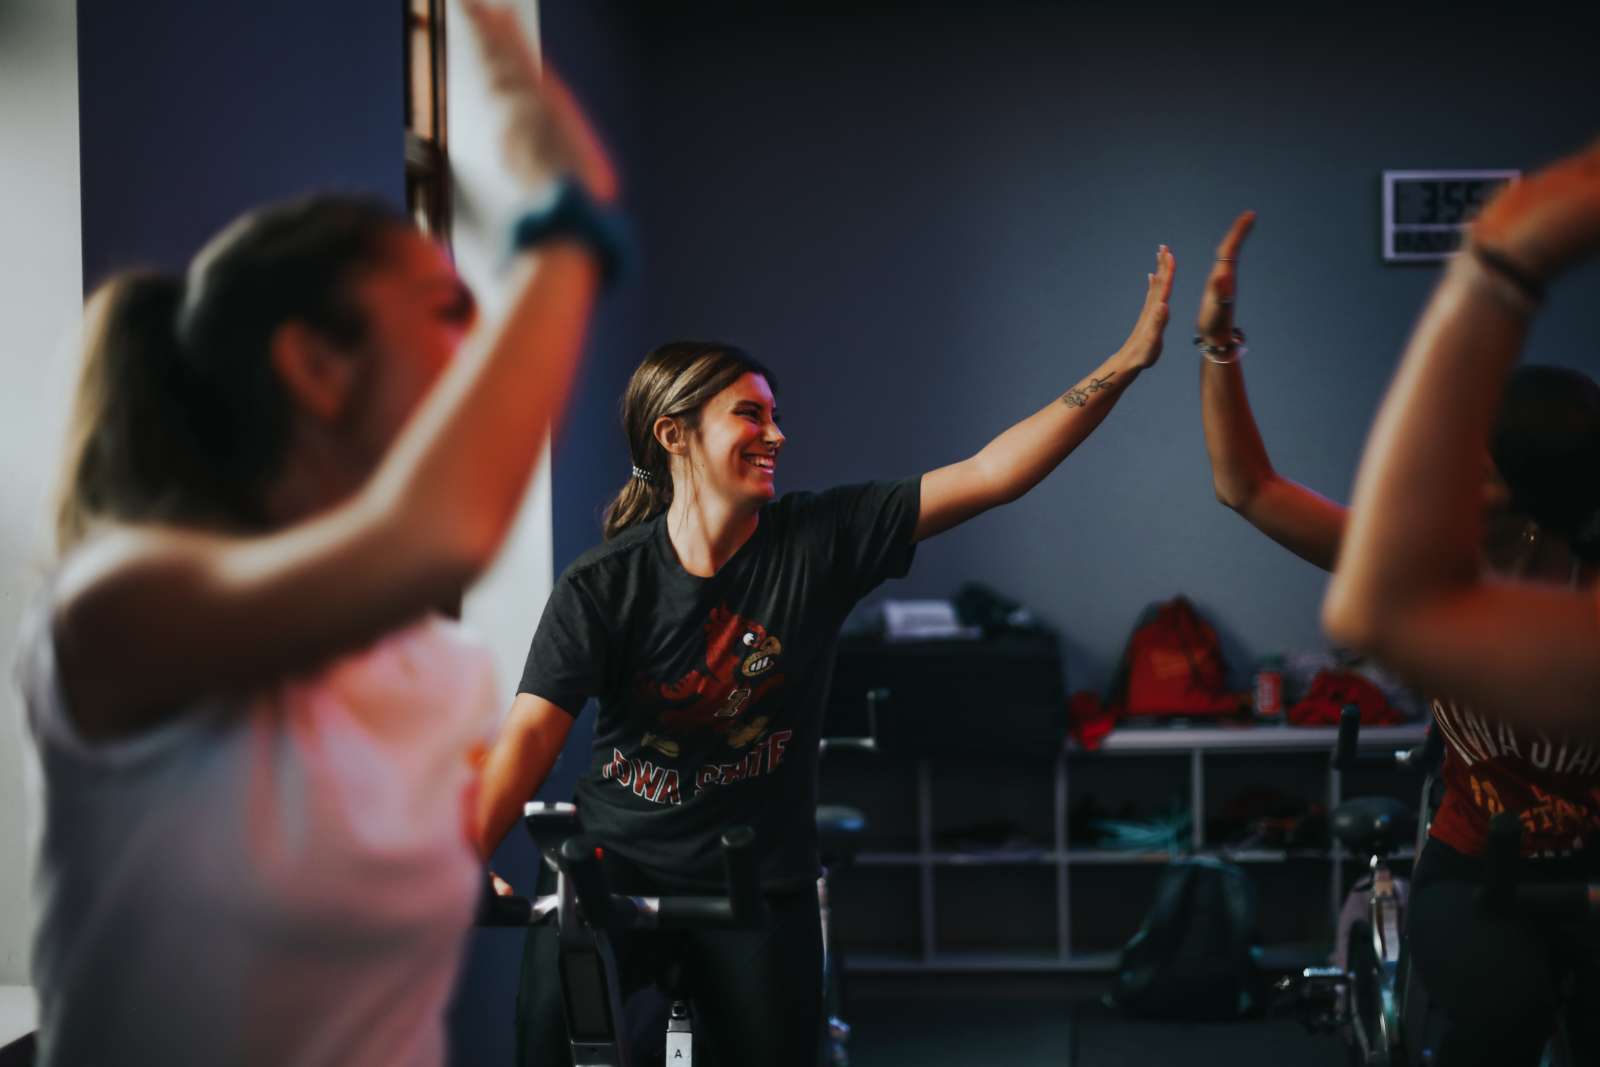 Top 5 Reasons to Try a Group Fitness Class - Elevate Fitness